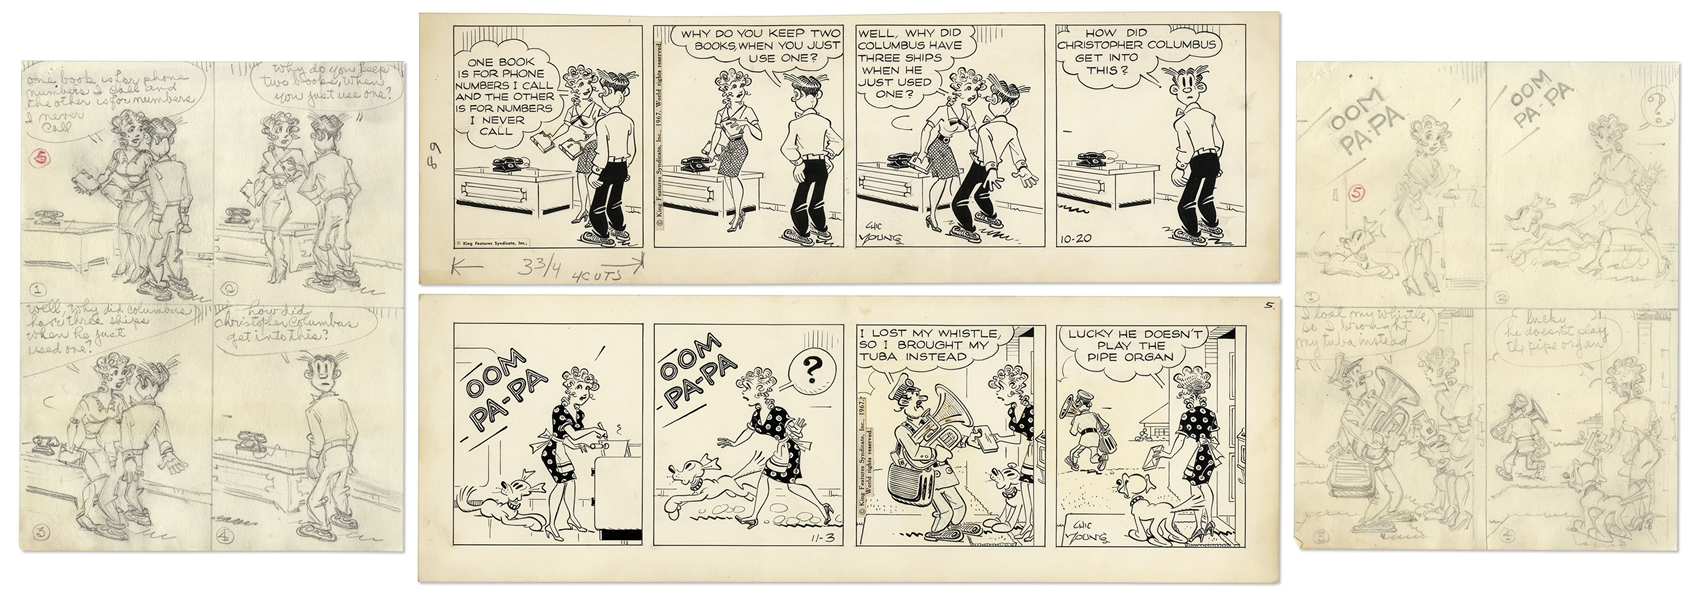 2 Chic Young Hand-Drawn ''Blondie'' Comic Strips From 1967 -- With Chic Young's Original Artwork for Both